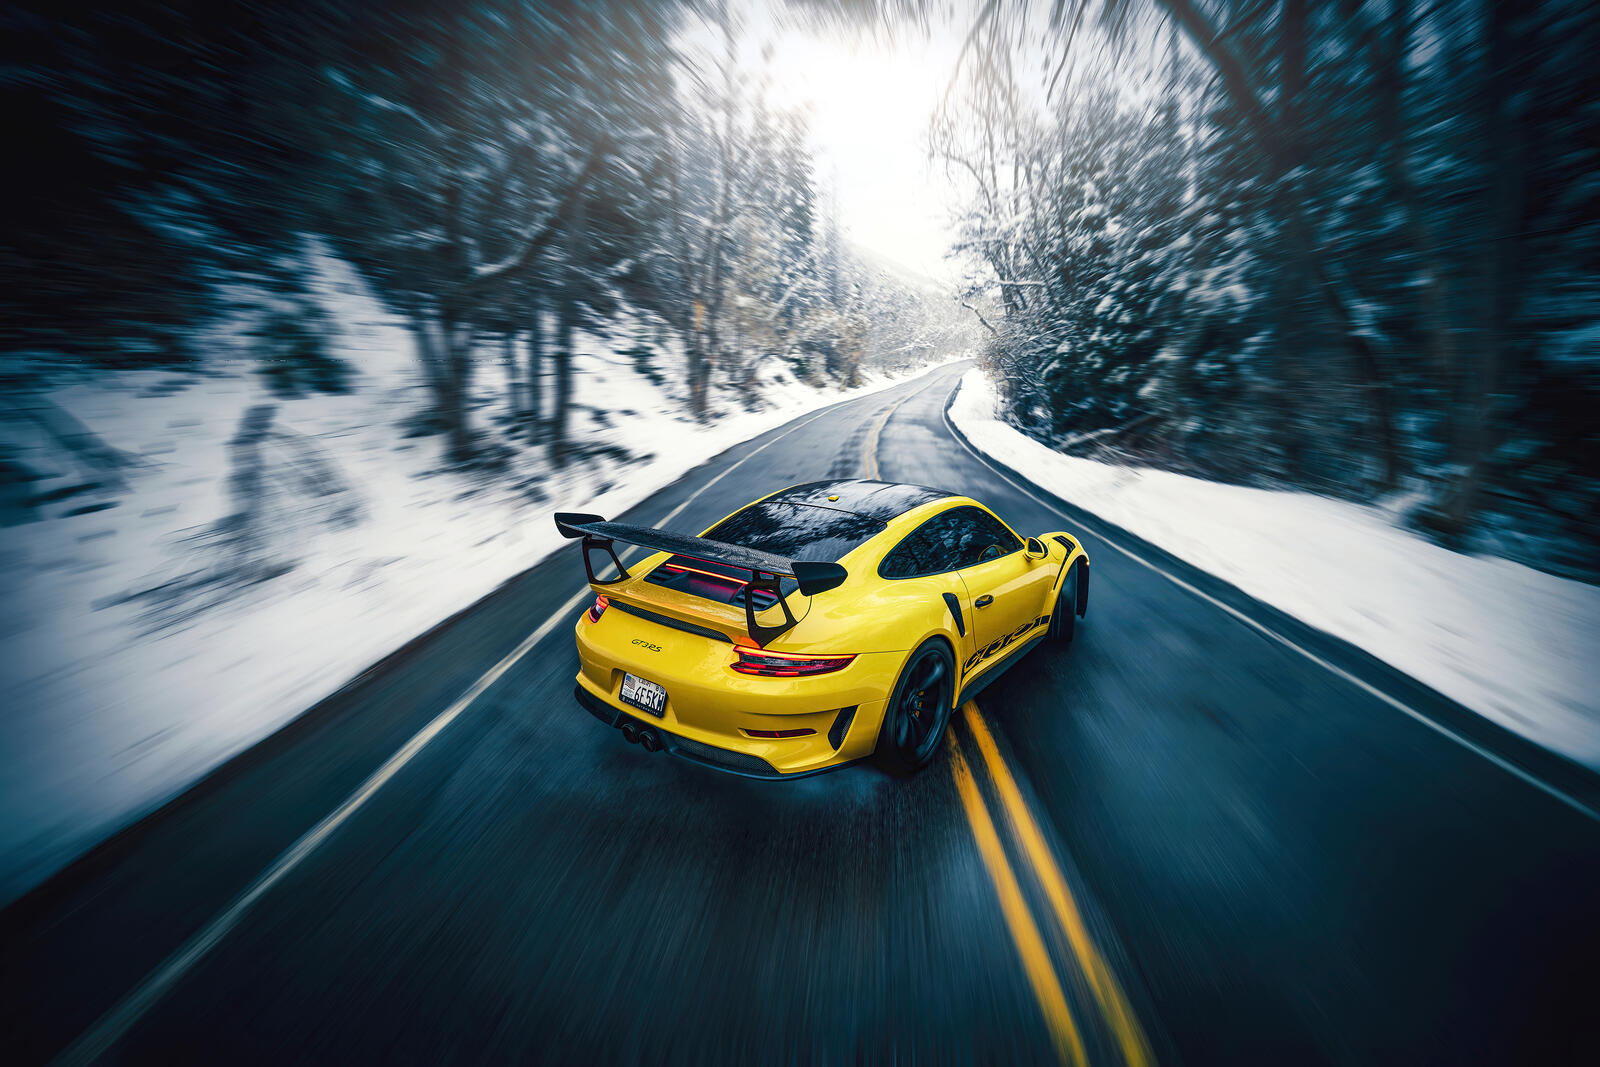 Free photo The yellow Porsche GT3 goes sideways on a country winter road.